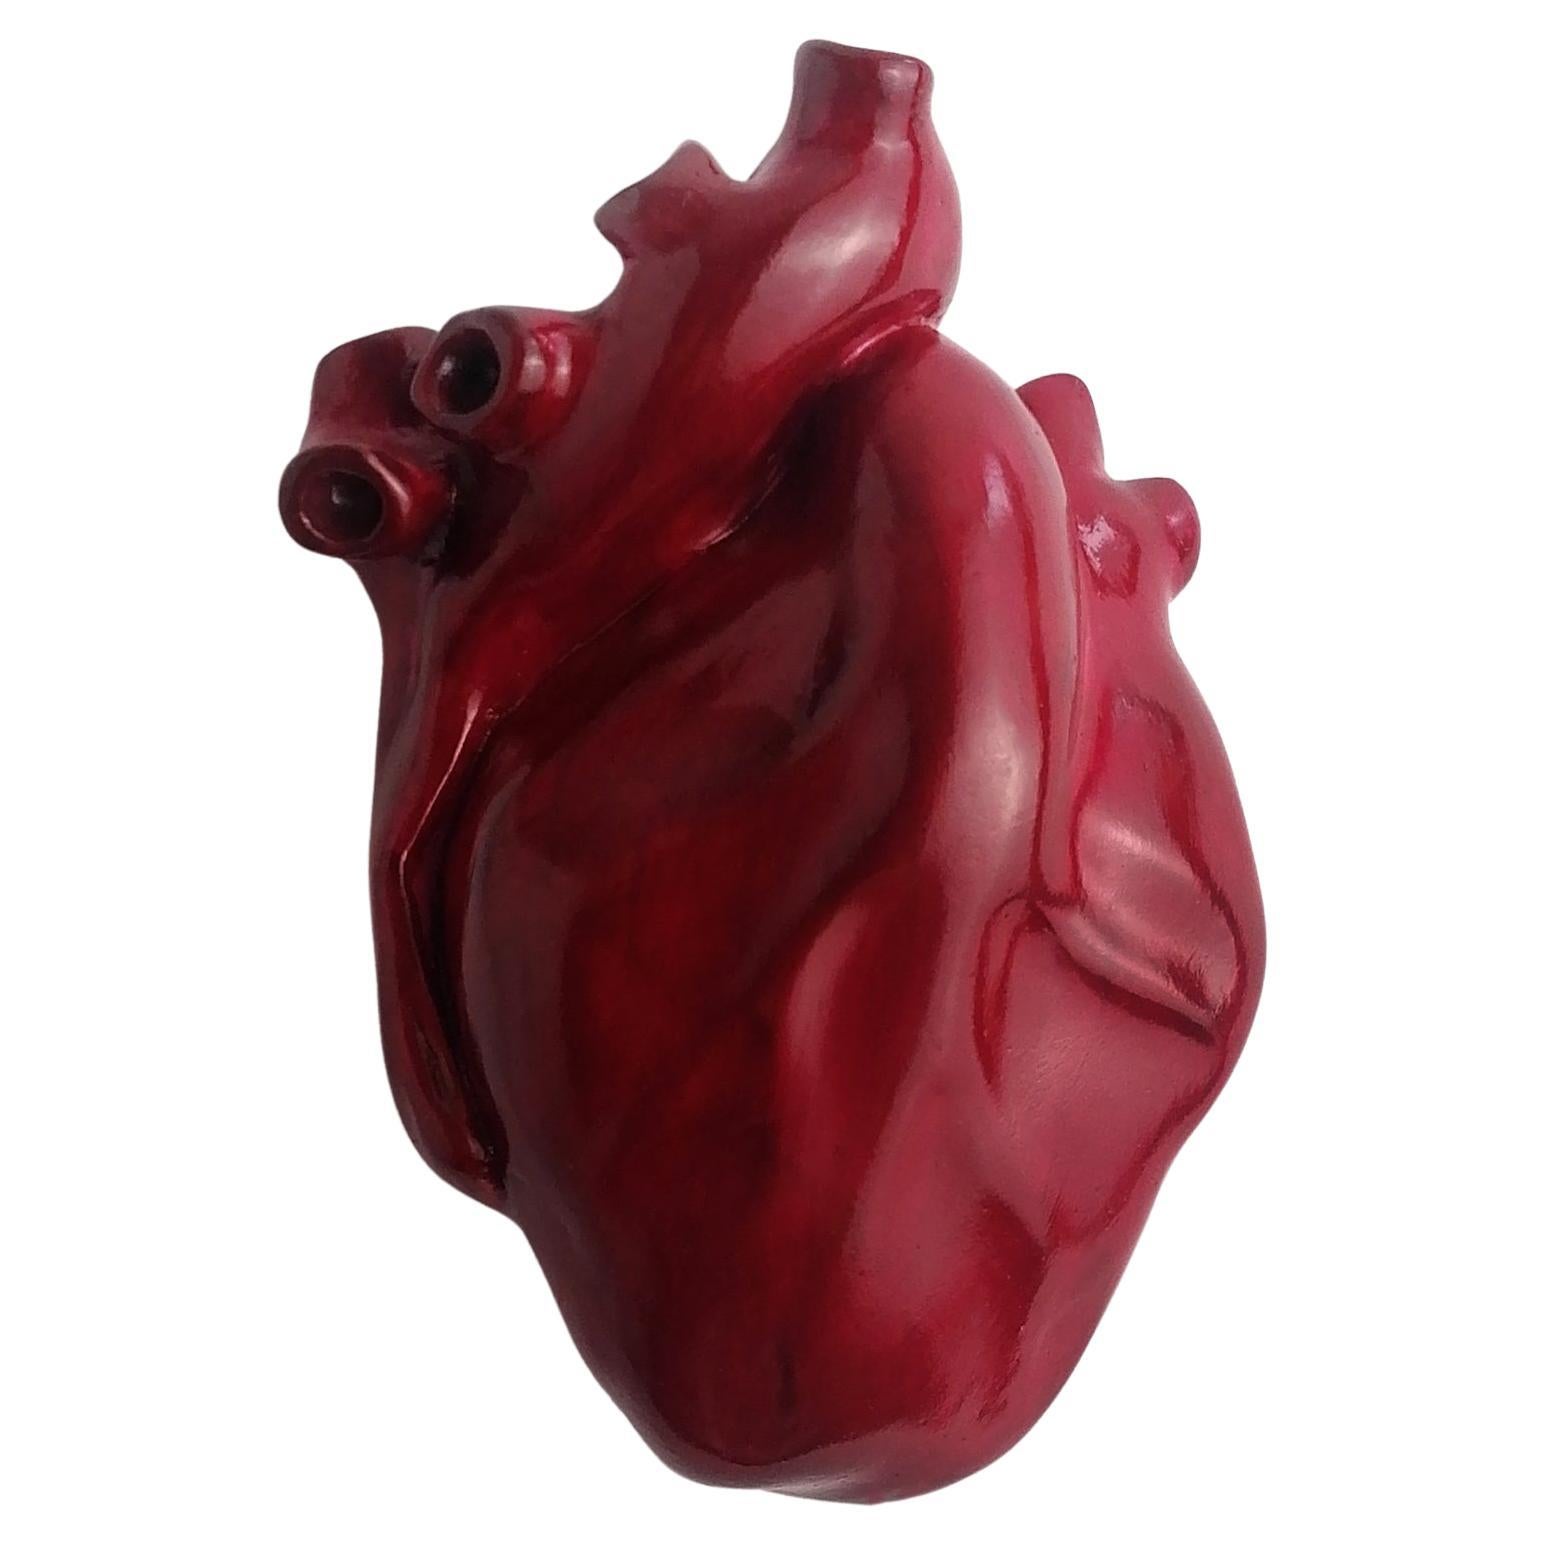 Heart Shaped Box, Wall Decor, 2022, Handmade in Italy, Anatomical Unique Piece